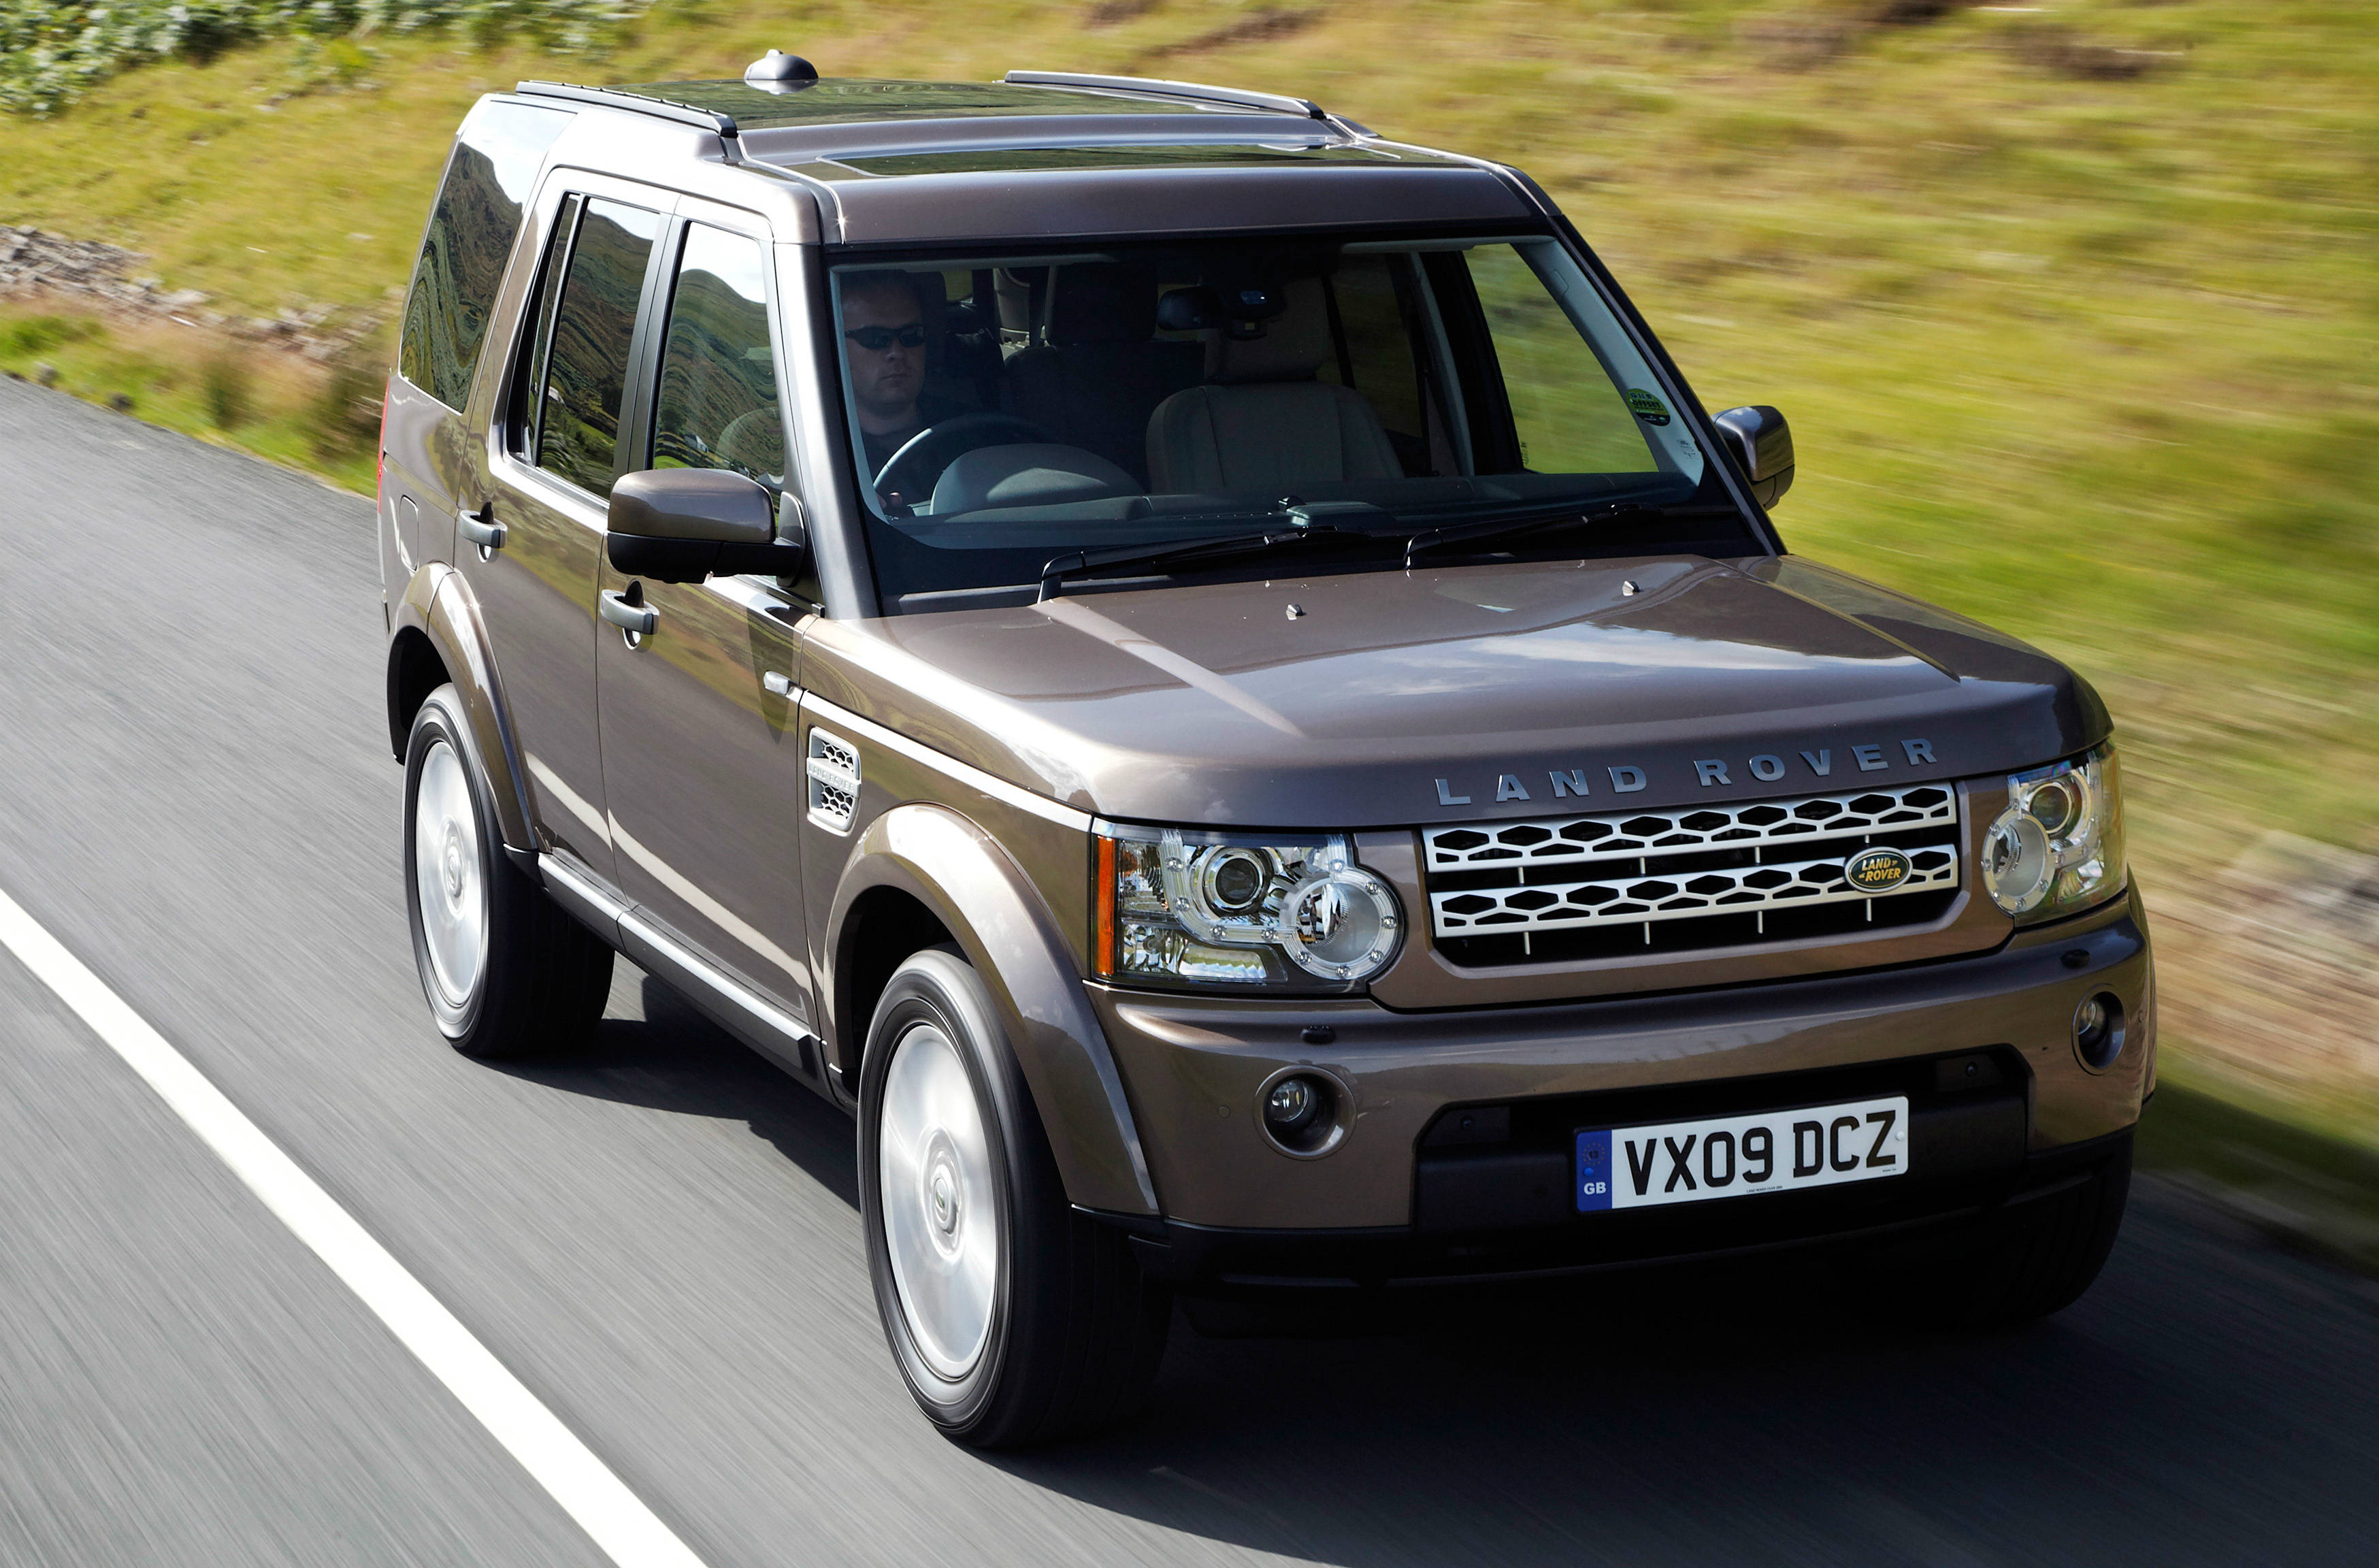 Land Rover Discovery 4 seven seat SUV